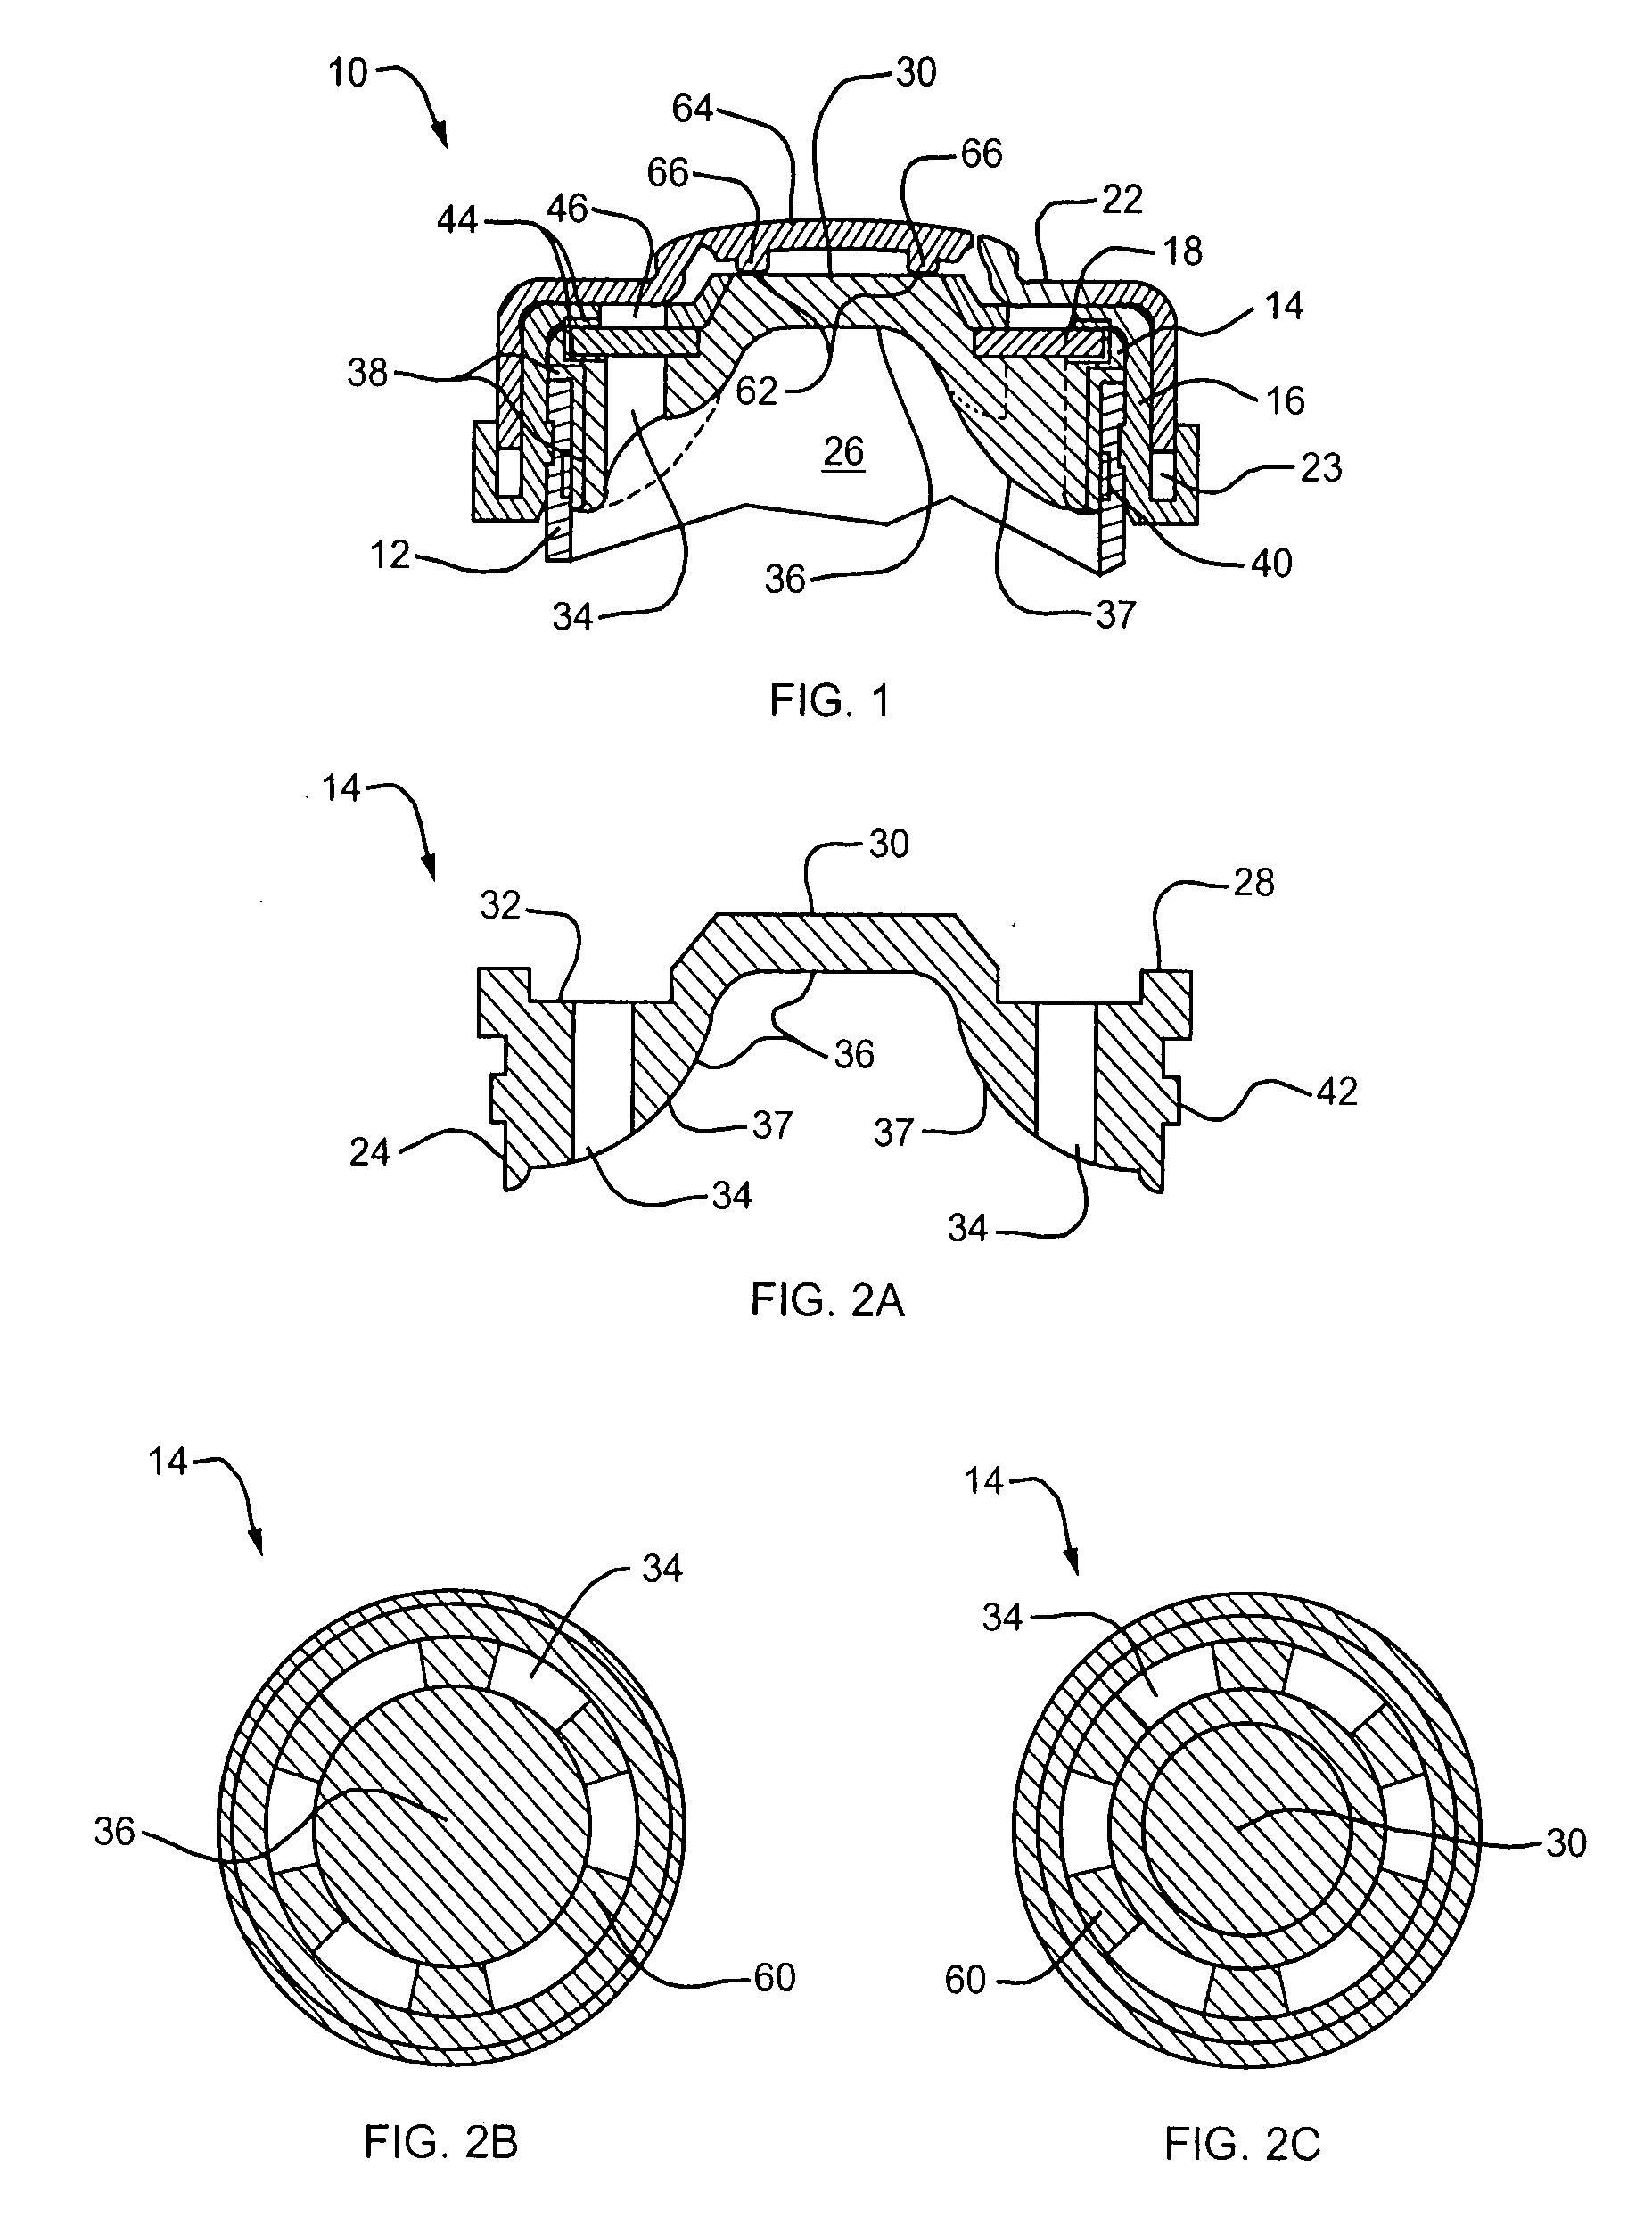 Needle penetrable and laser resealable lyophilization device and related method